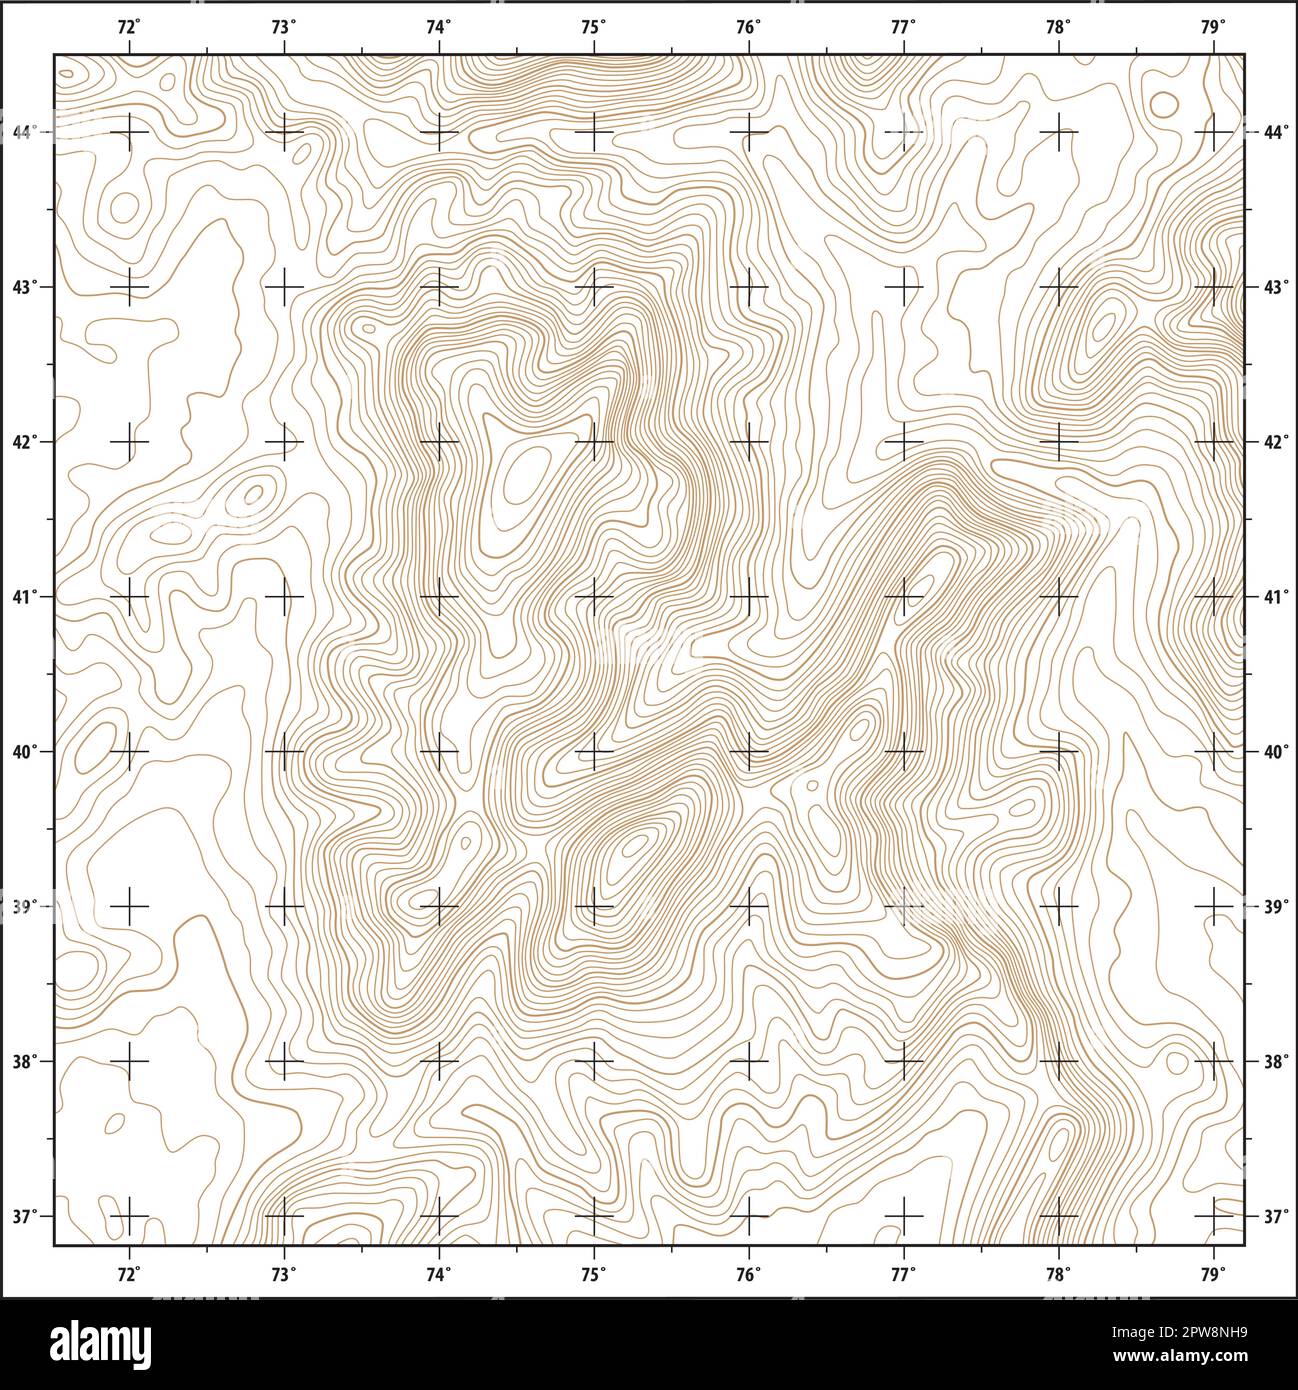 Imaginary topographic contour map with coordinate grid Stock Vector